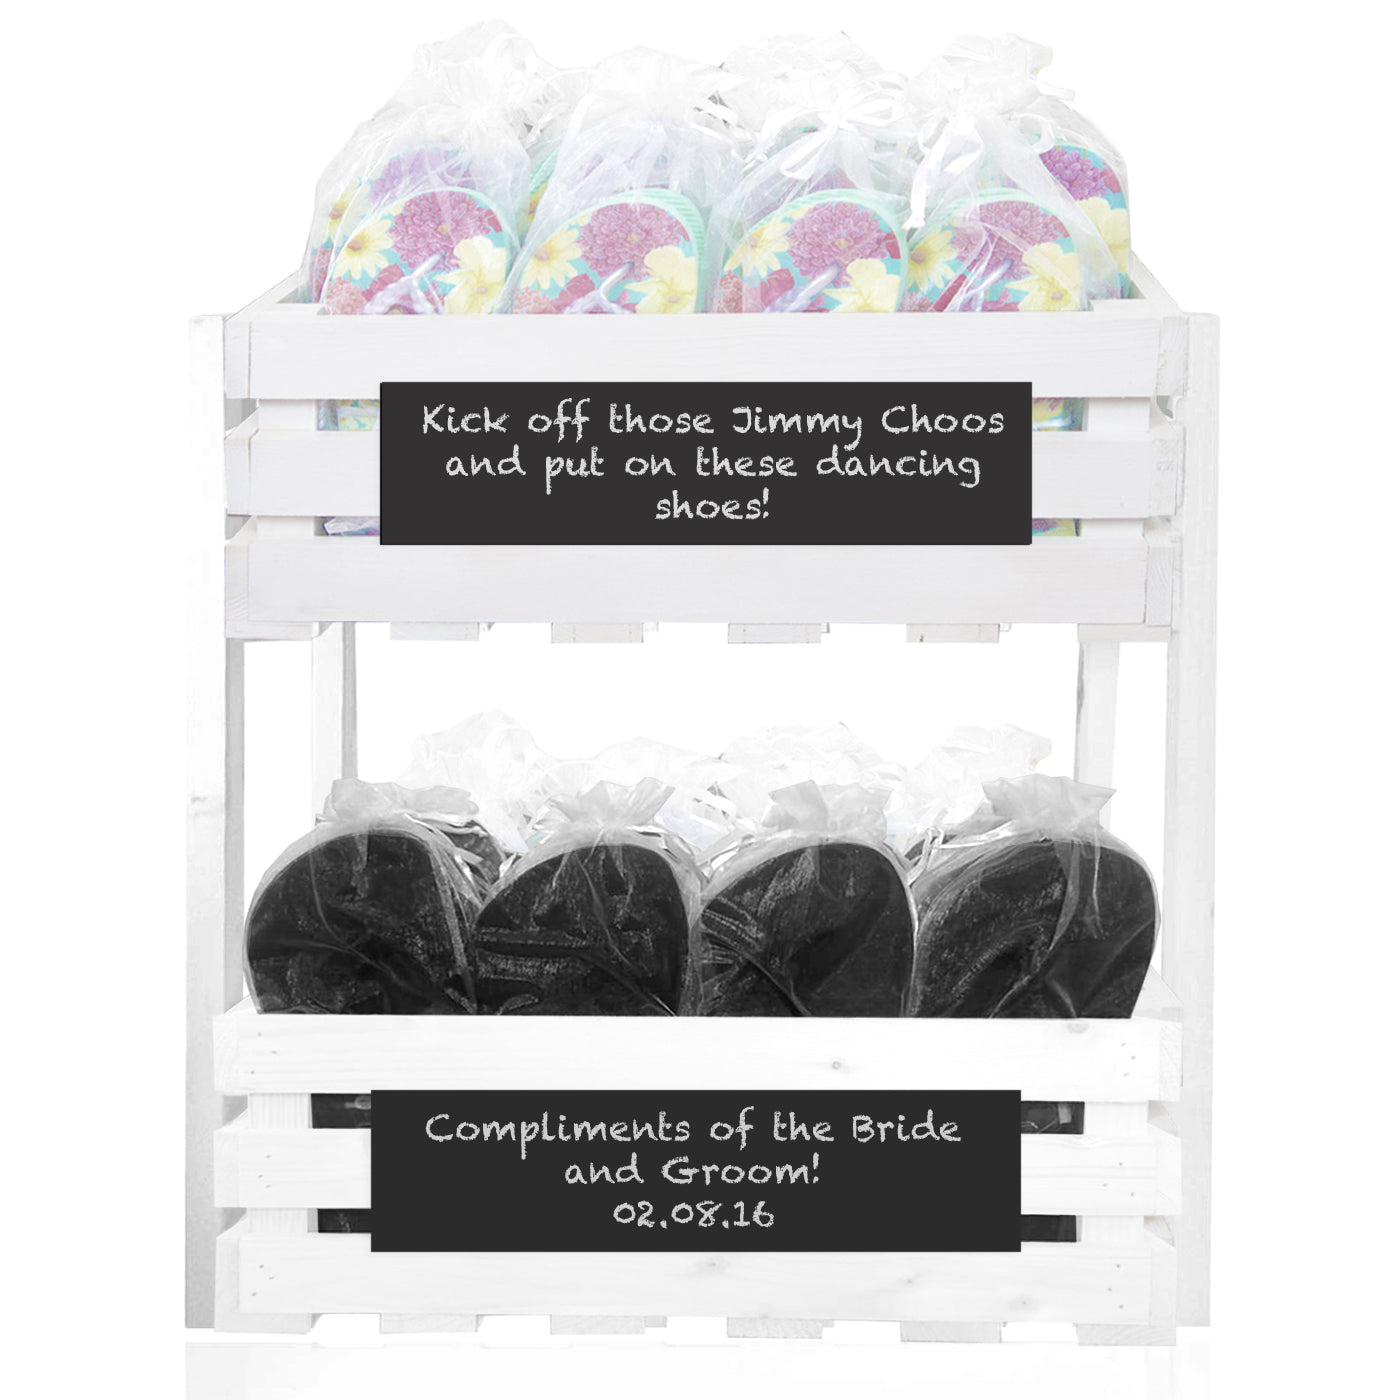 20 x Floral flip flops and 20 x Mens flip flops in a chalkboard crate tower